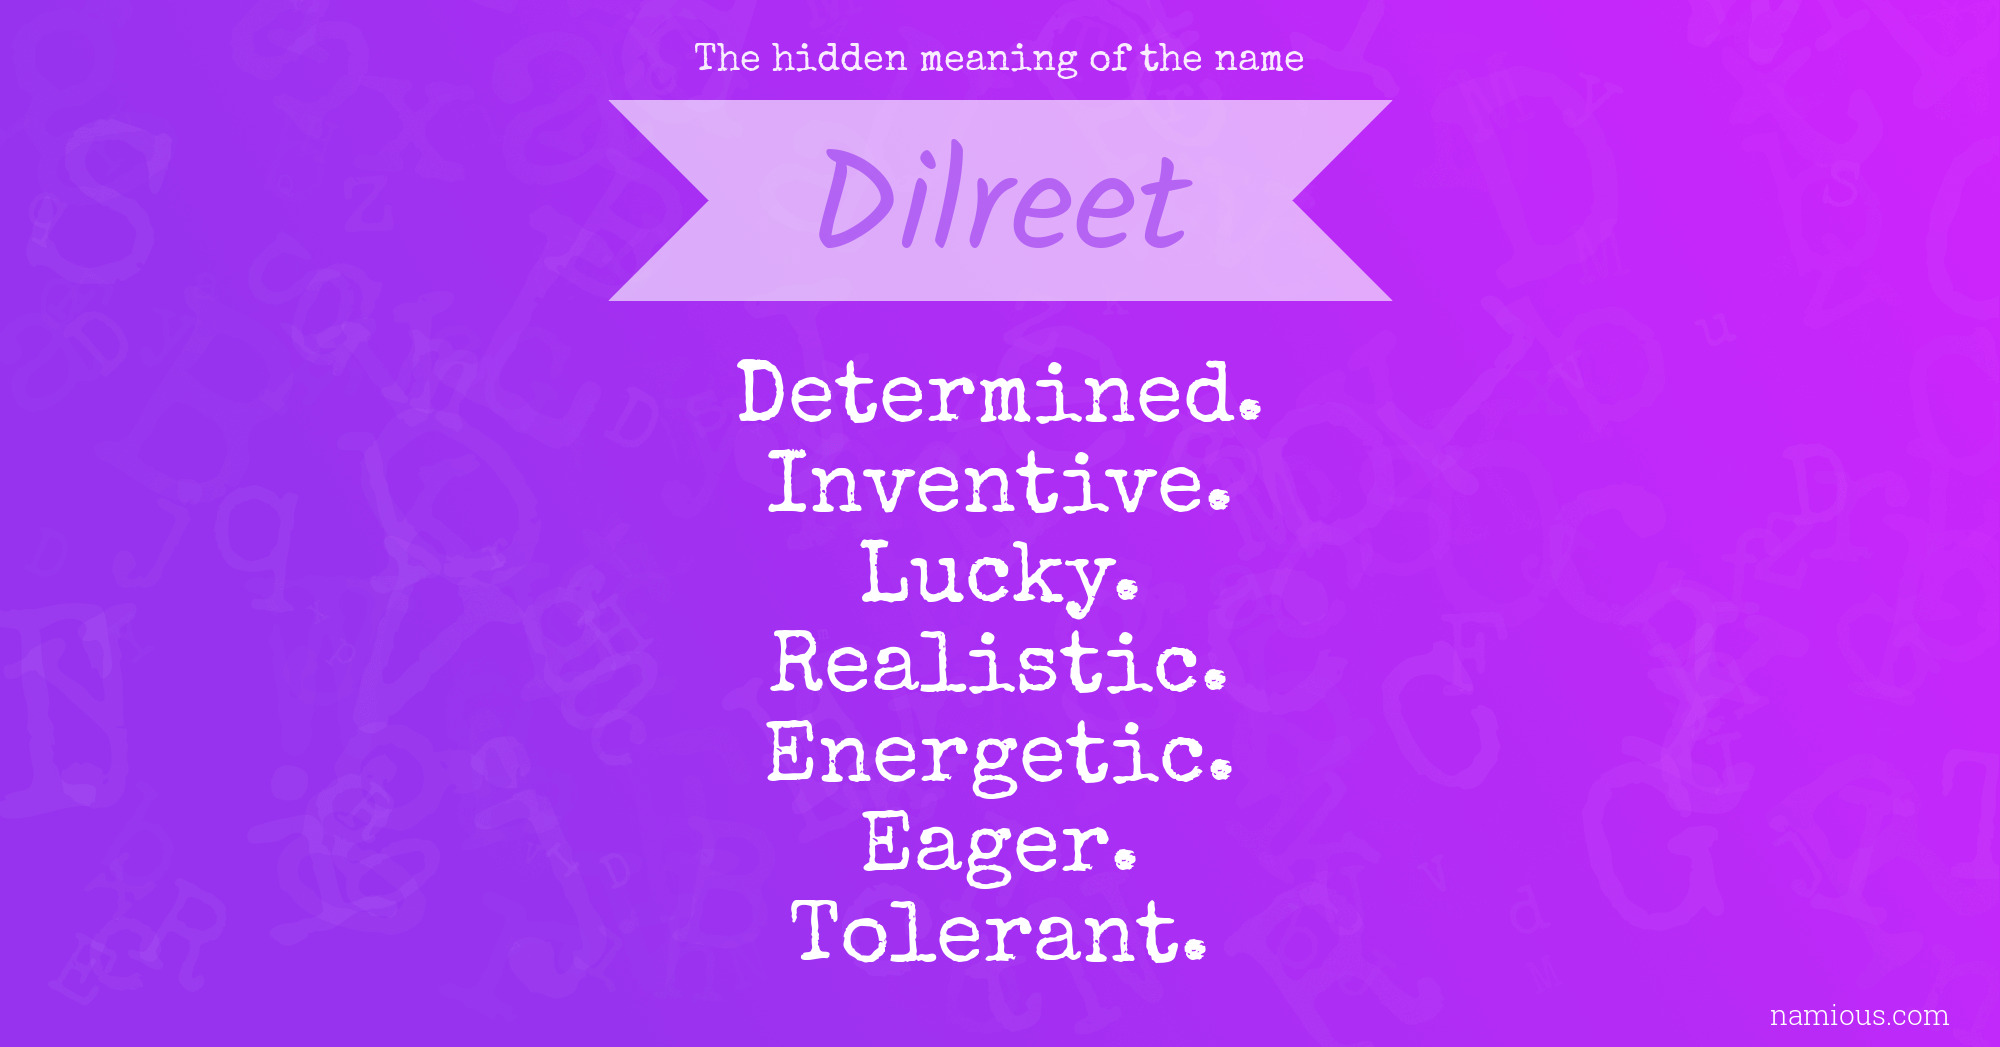 The hidden meaning of the name Dilreet